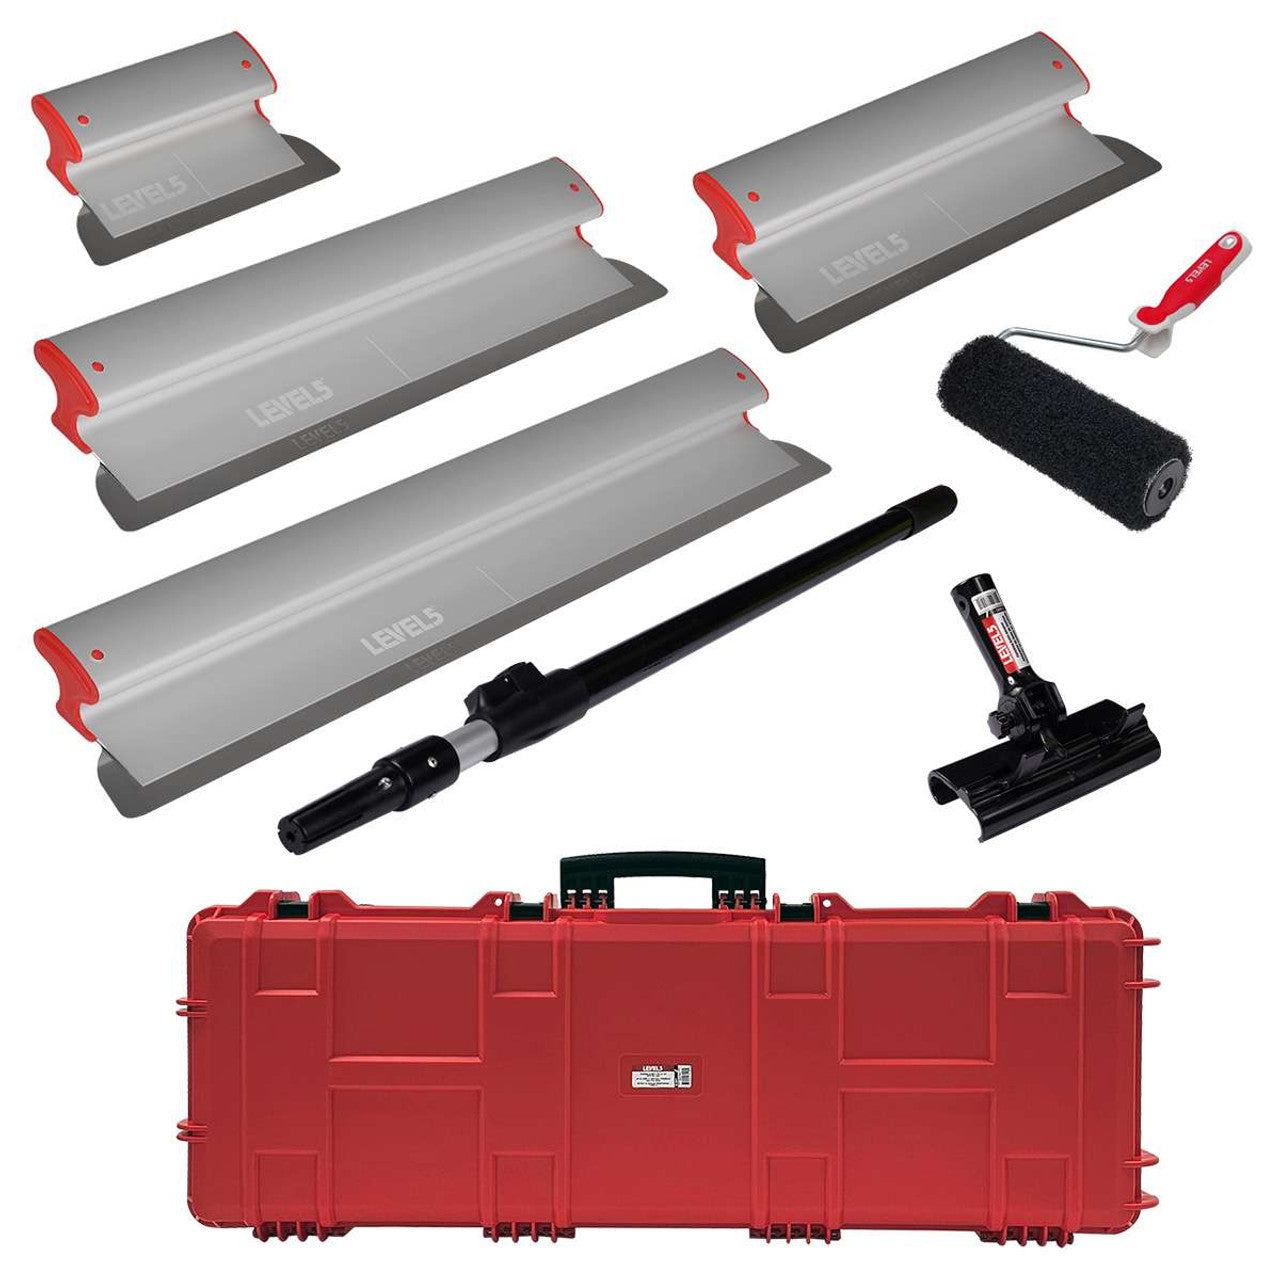 Level 5 Skimming Blade & Compound Roller Set - 10", 16", 24", 32" with Extendable Handle